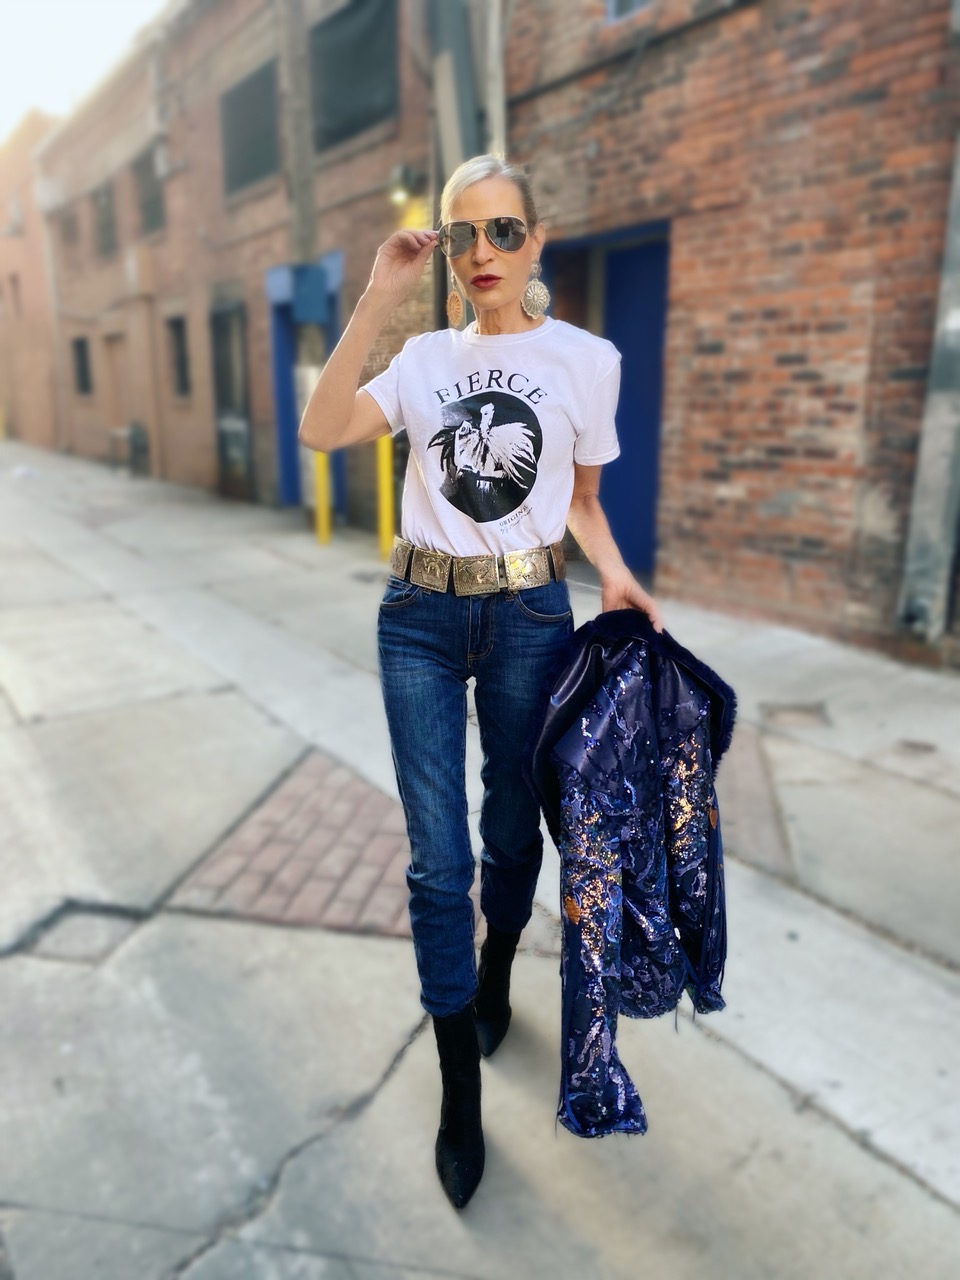 Lifestyle Influencer, Jamie Lewinger of More Than Turquoise, wearing Julie Ewing Designs FIERCE tee